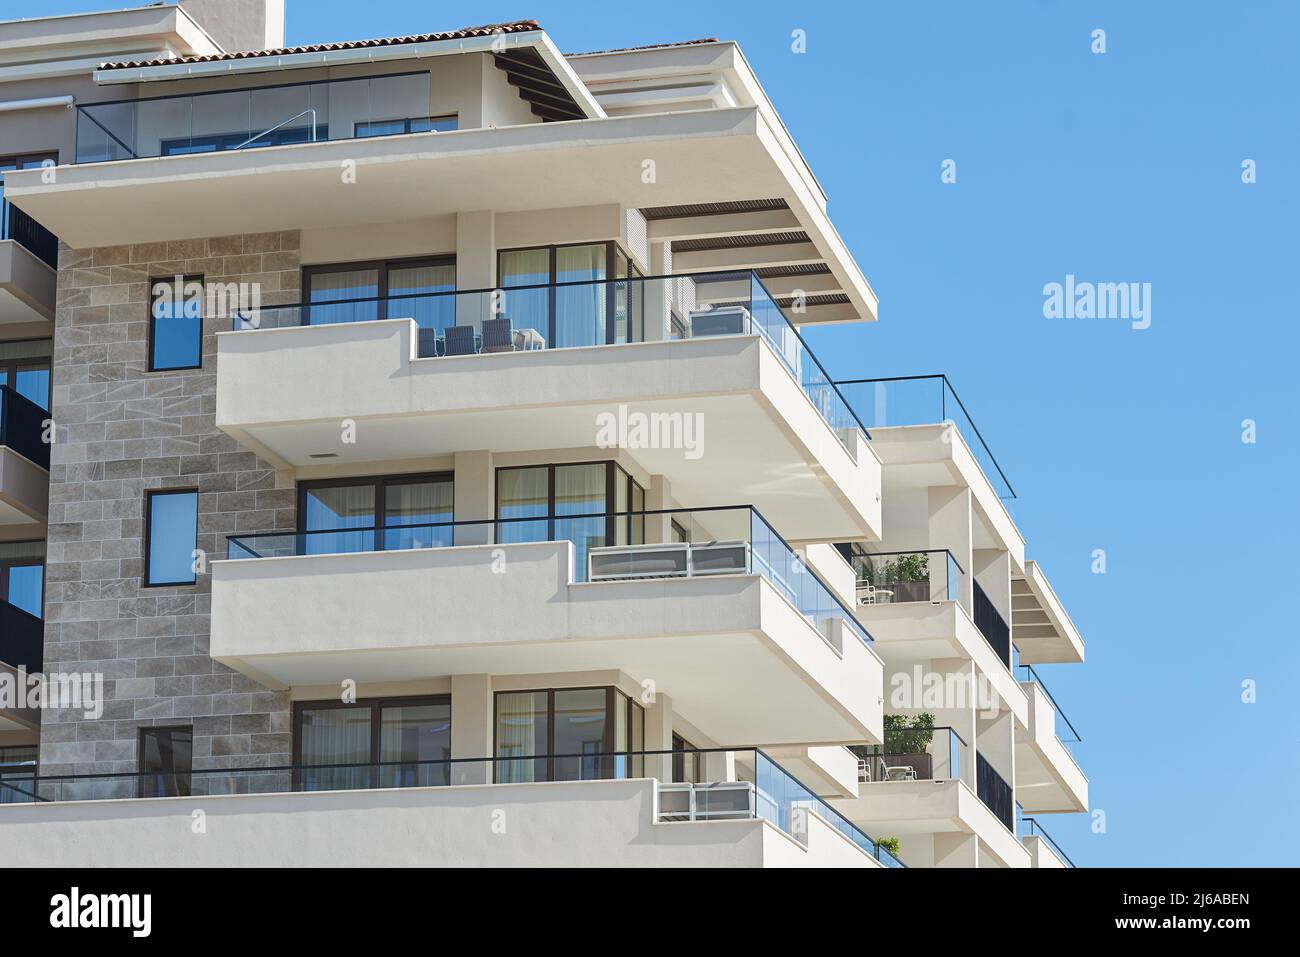 Balcony with glass railing in a modern apartment building Stock Photo